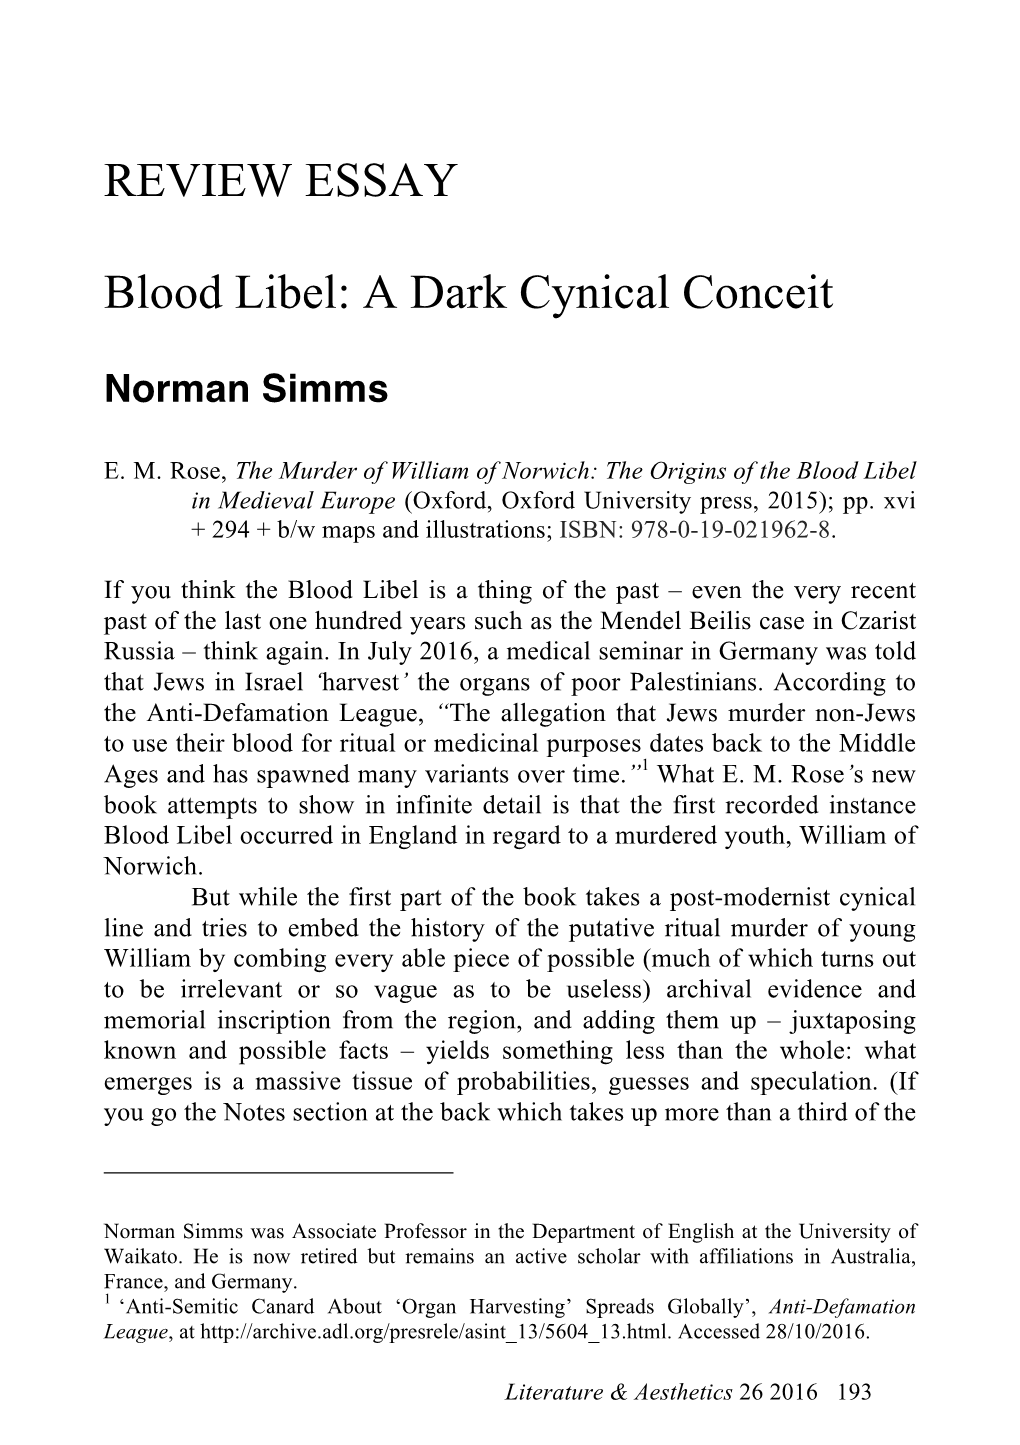 REVIEW ESSAY Blood Libel: a Dark Cynical Conceit